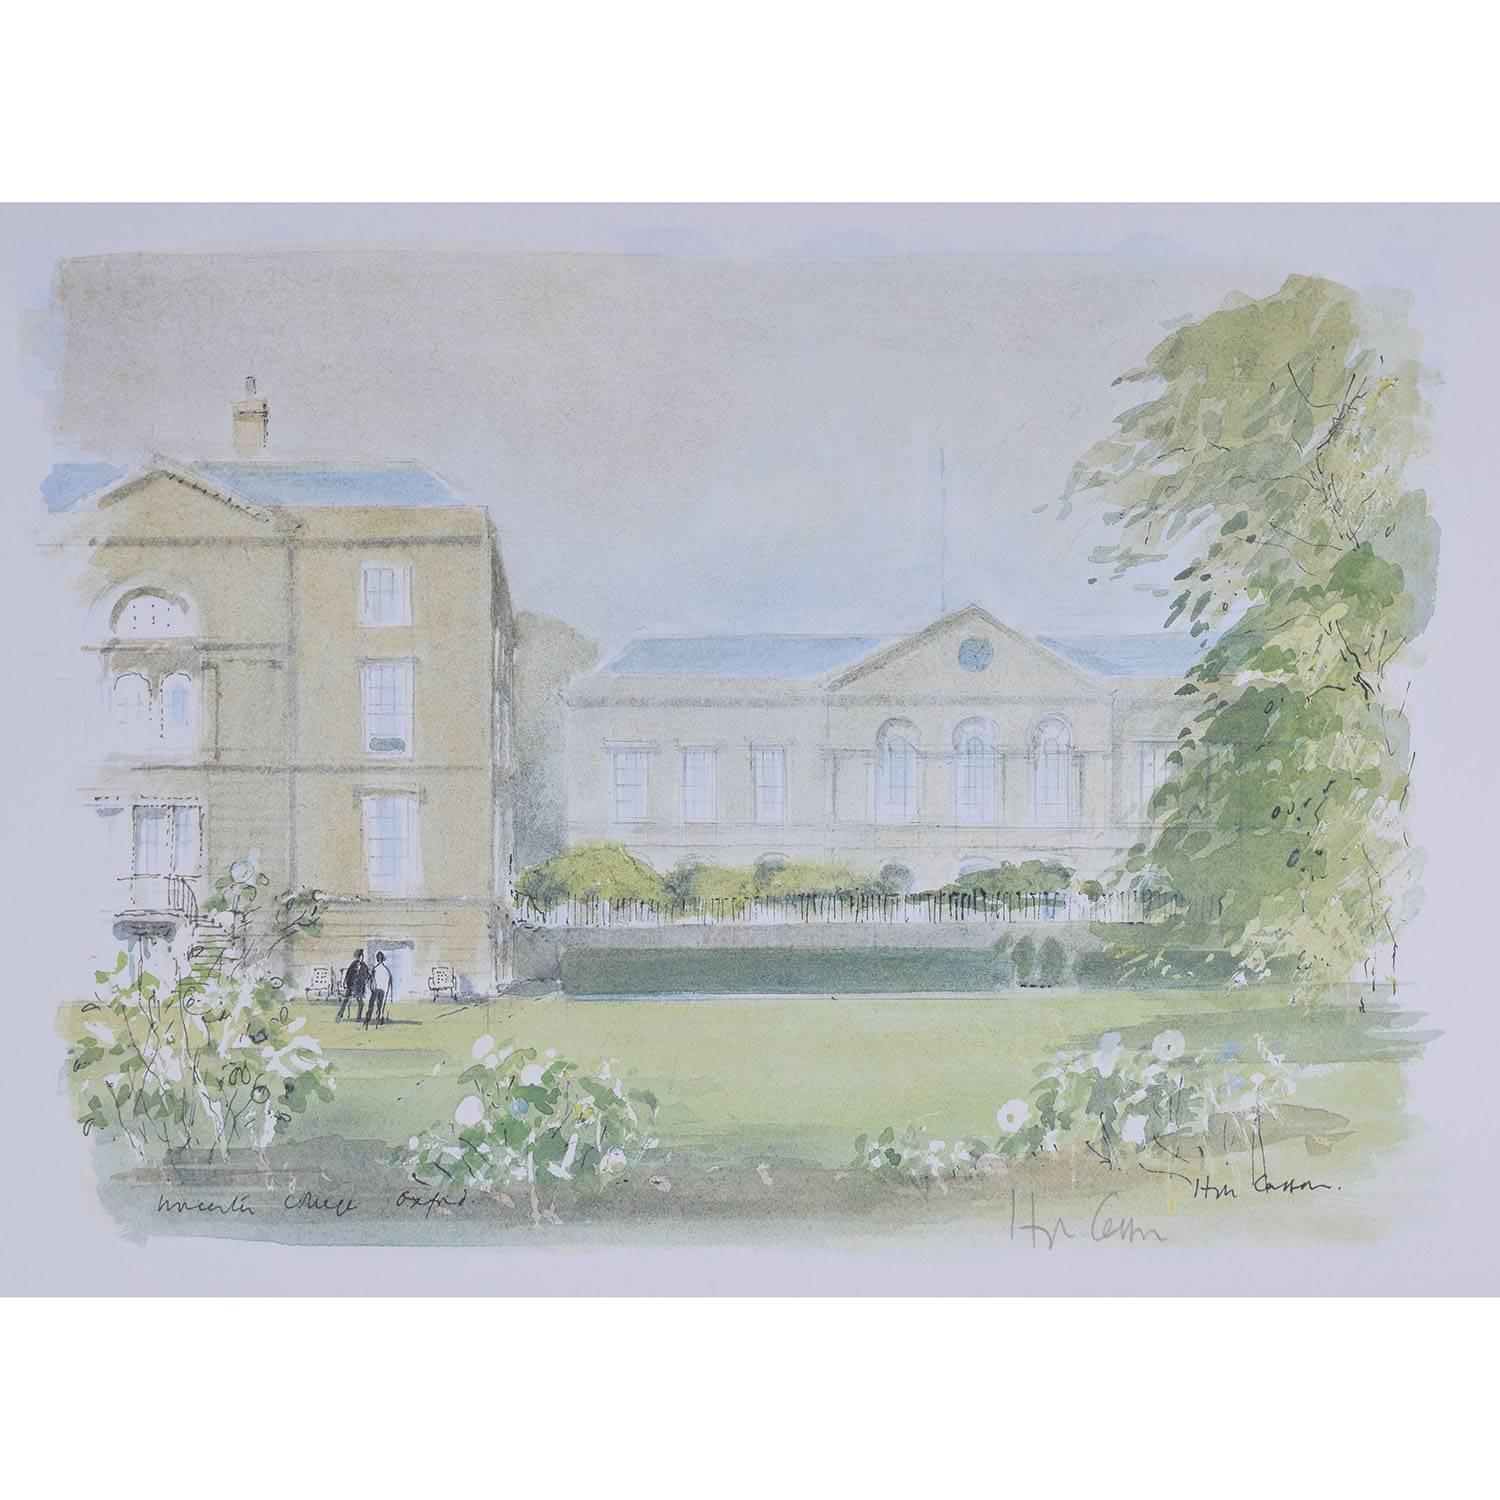 To see our other views of Oxford and Cambridge, scroll down to "More from this Seller" and below it click on "See all from this seller" - or send us a message if you cannot find the view you want.

Sir Hugh Casson (1910-1999)
Worcester College